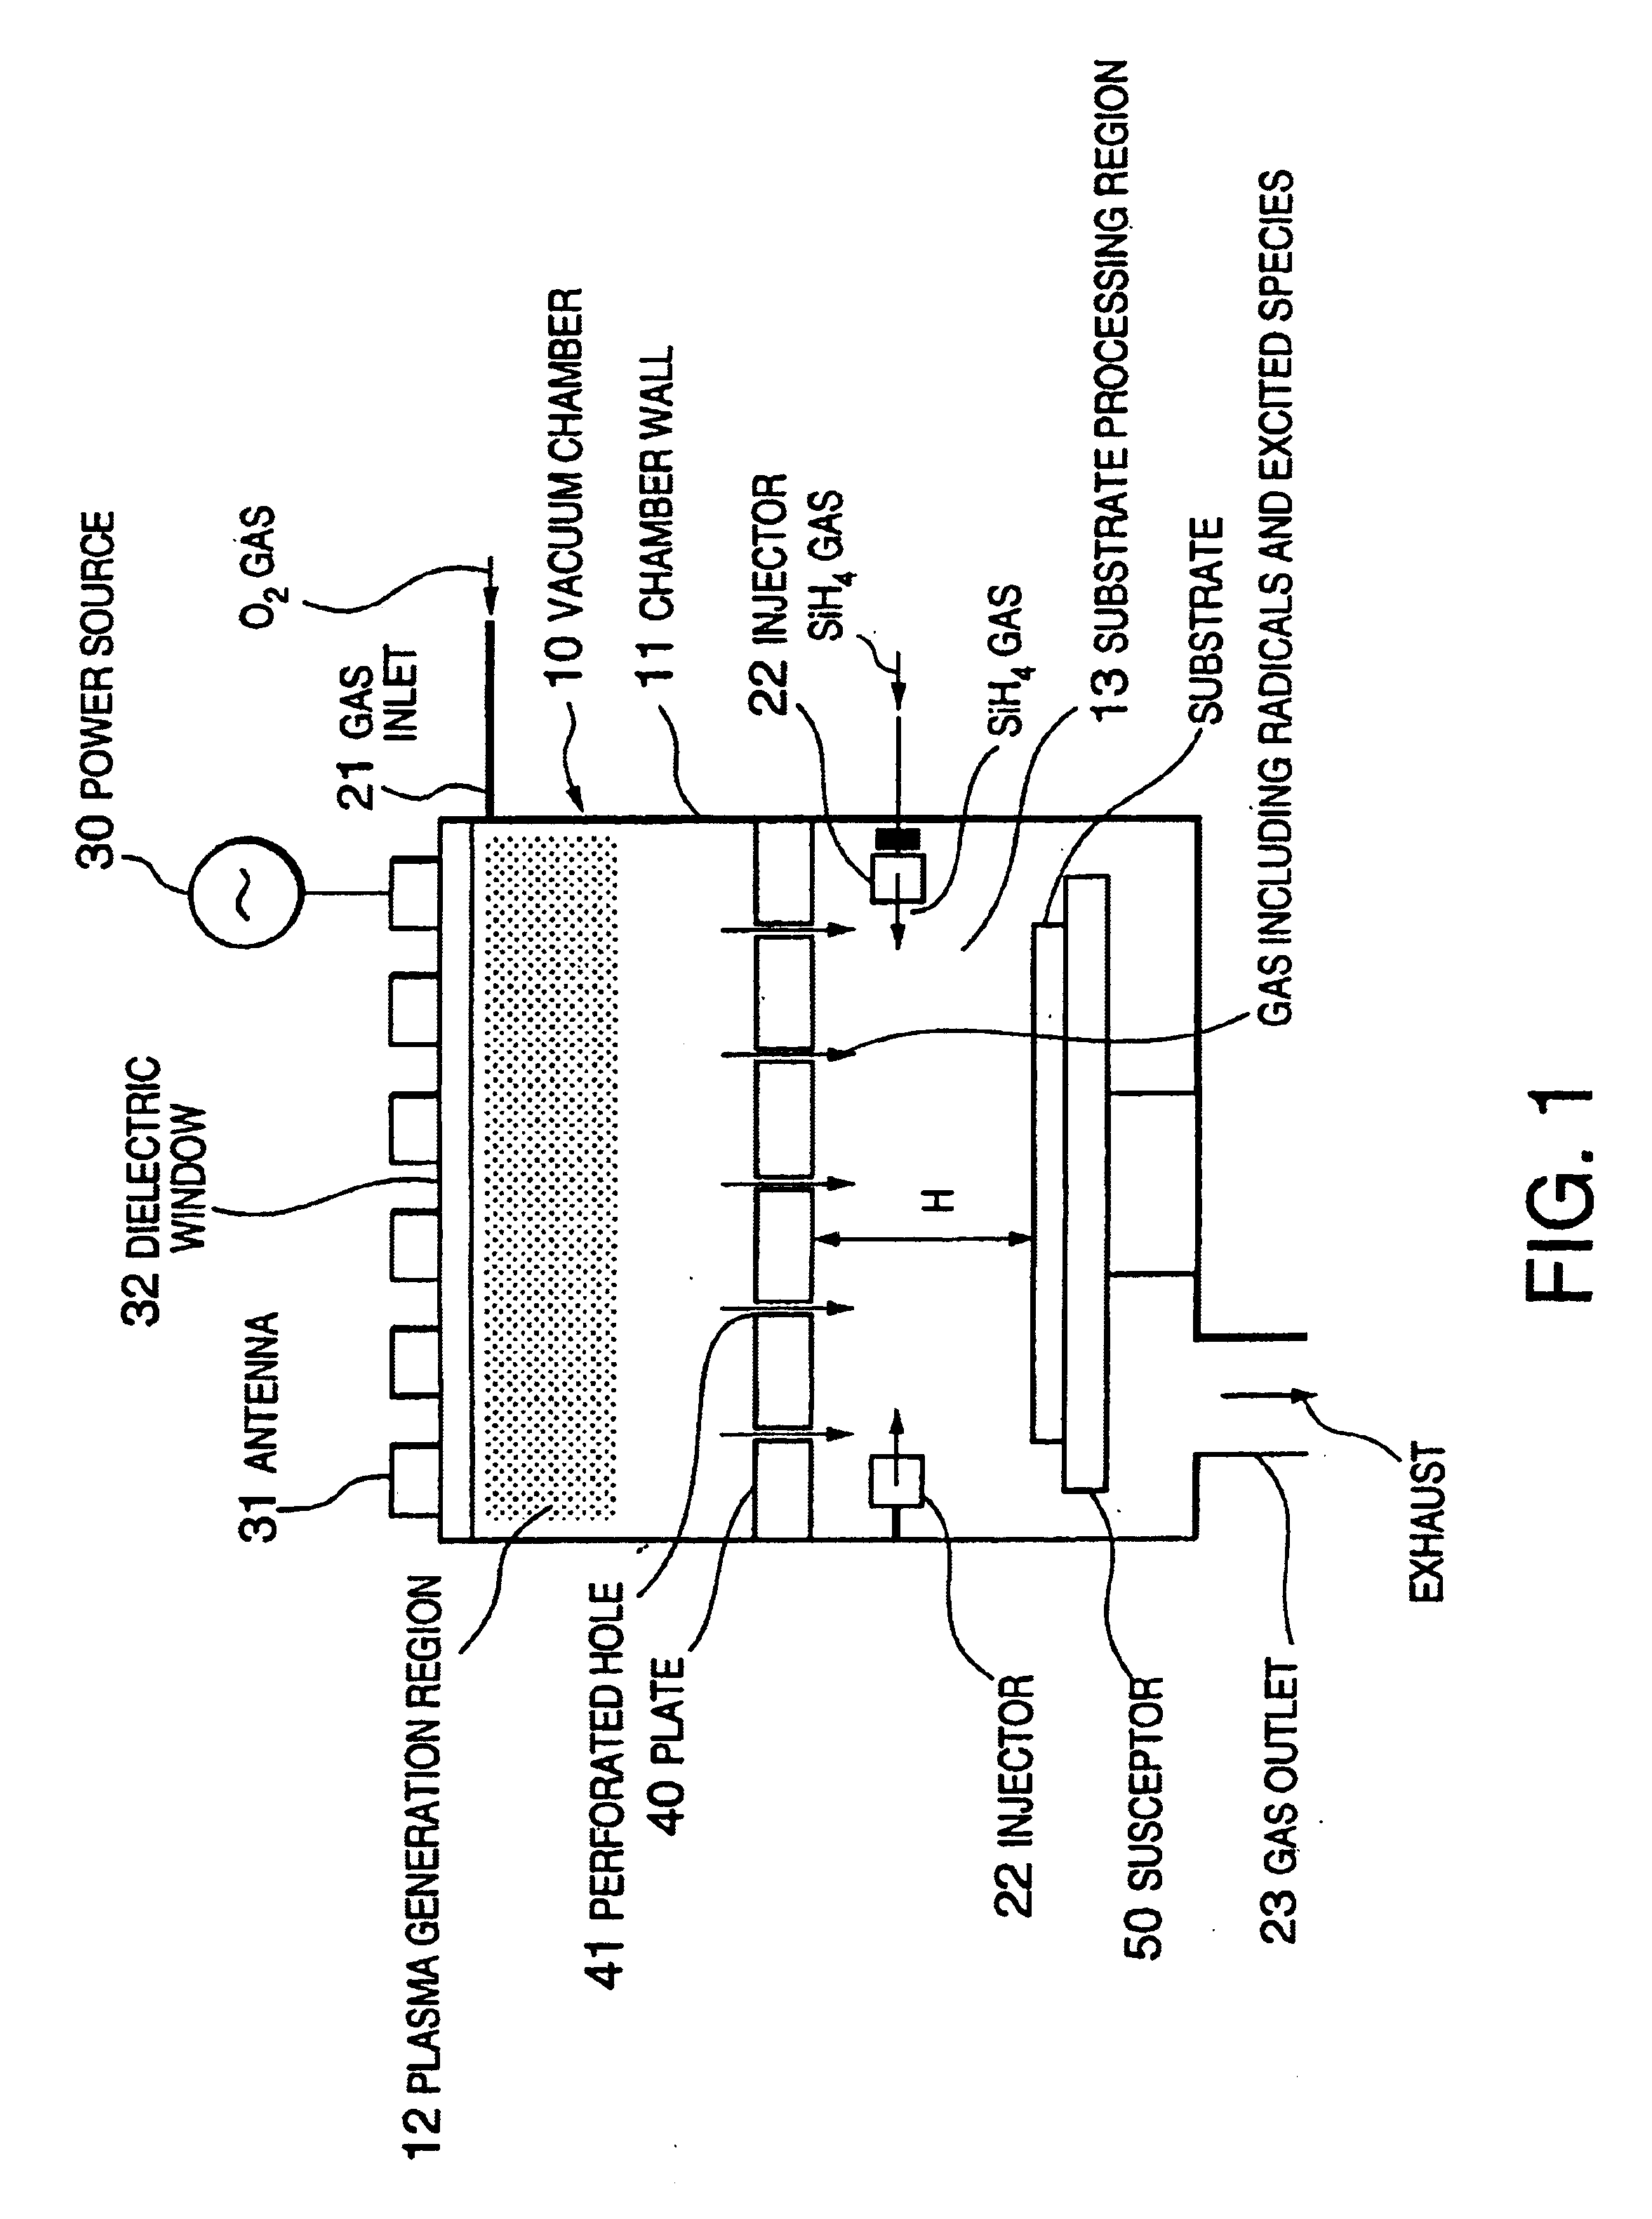 Remote plasma apparatus for processing substrate with two types of gases